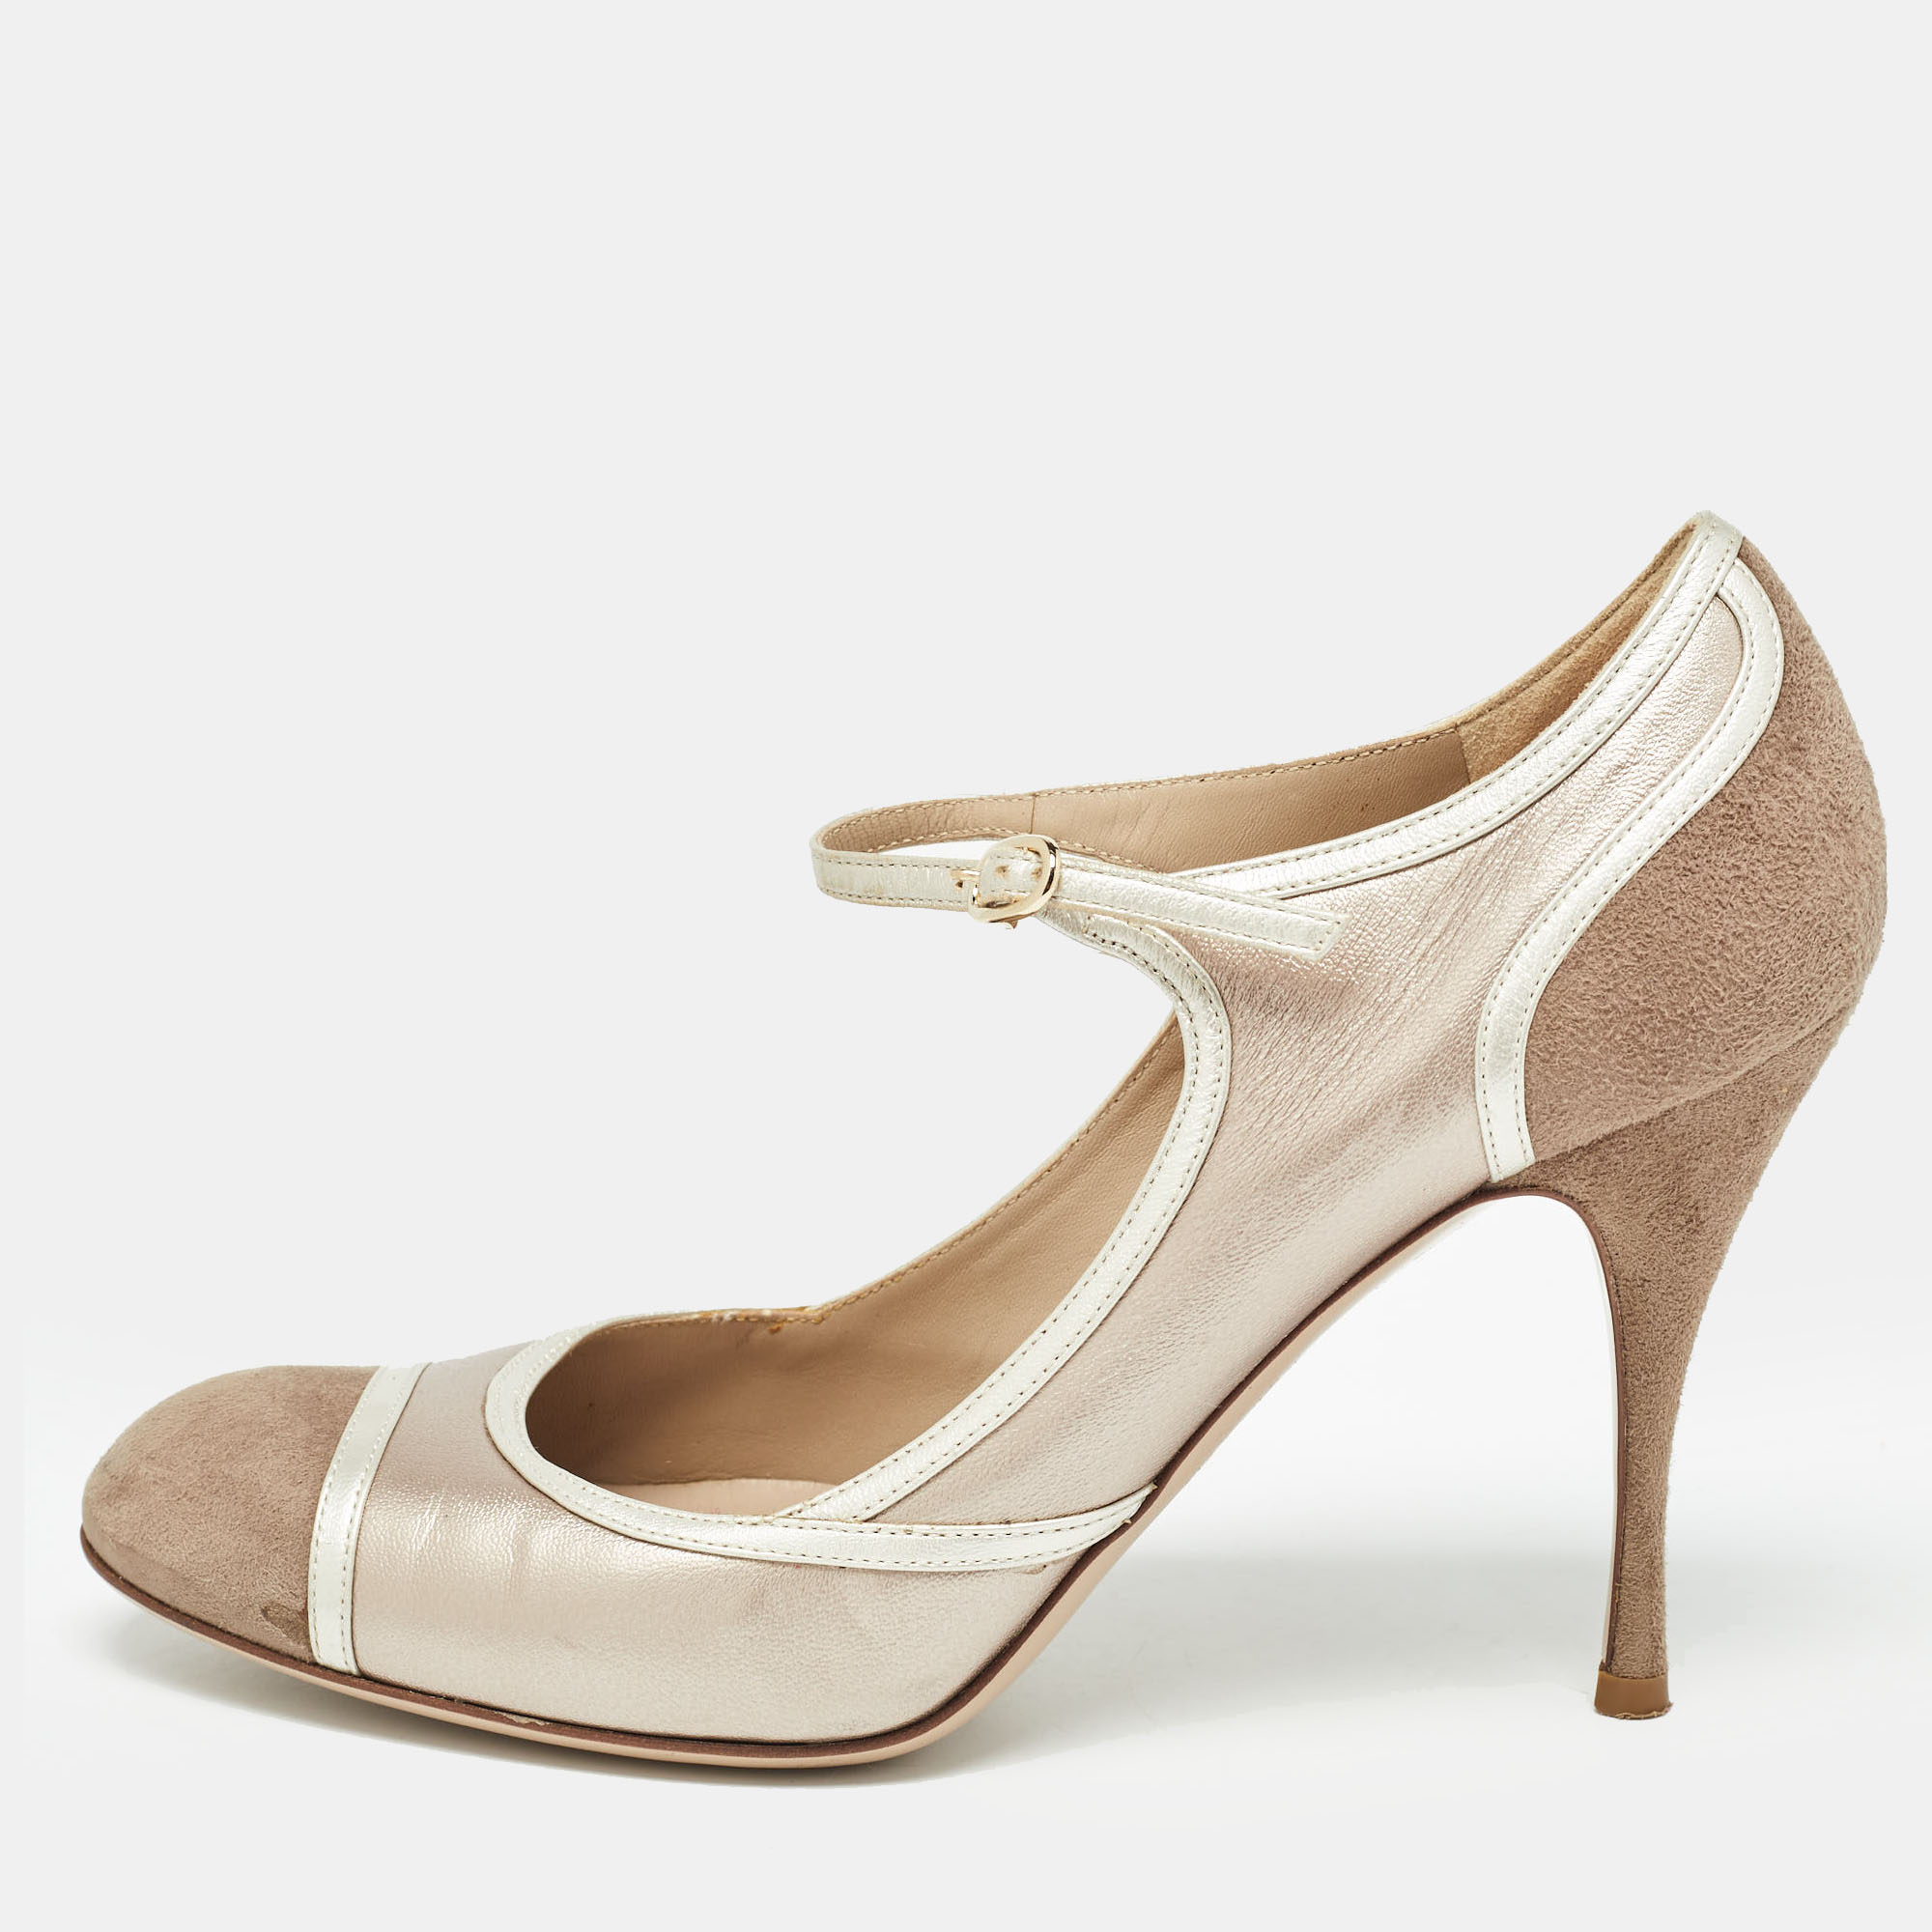 Valentino Beige Suede and Leather Ankle Strap Pumps Size 37.5